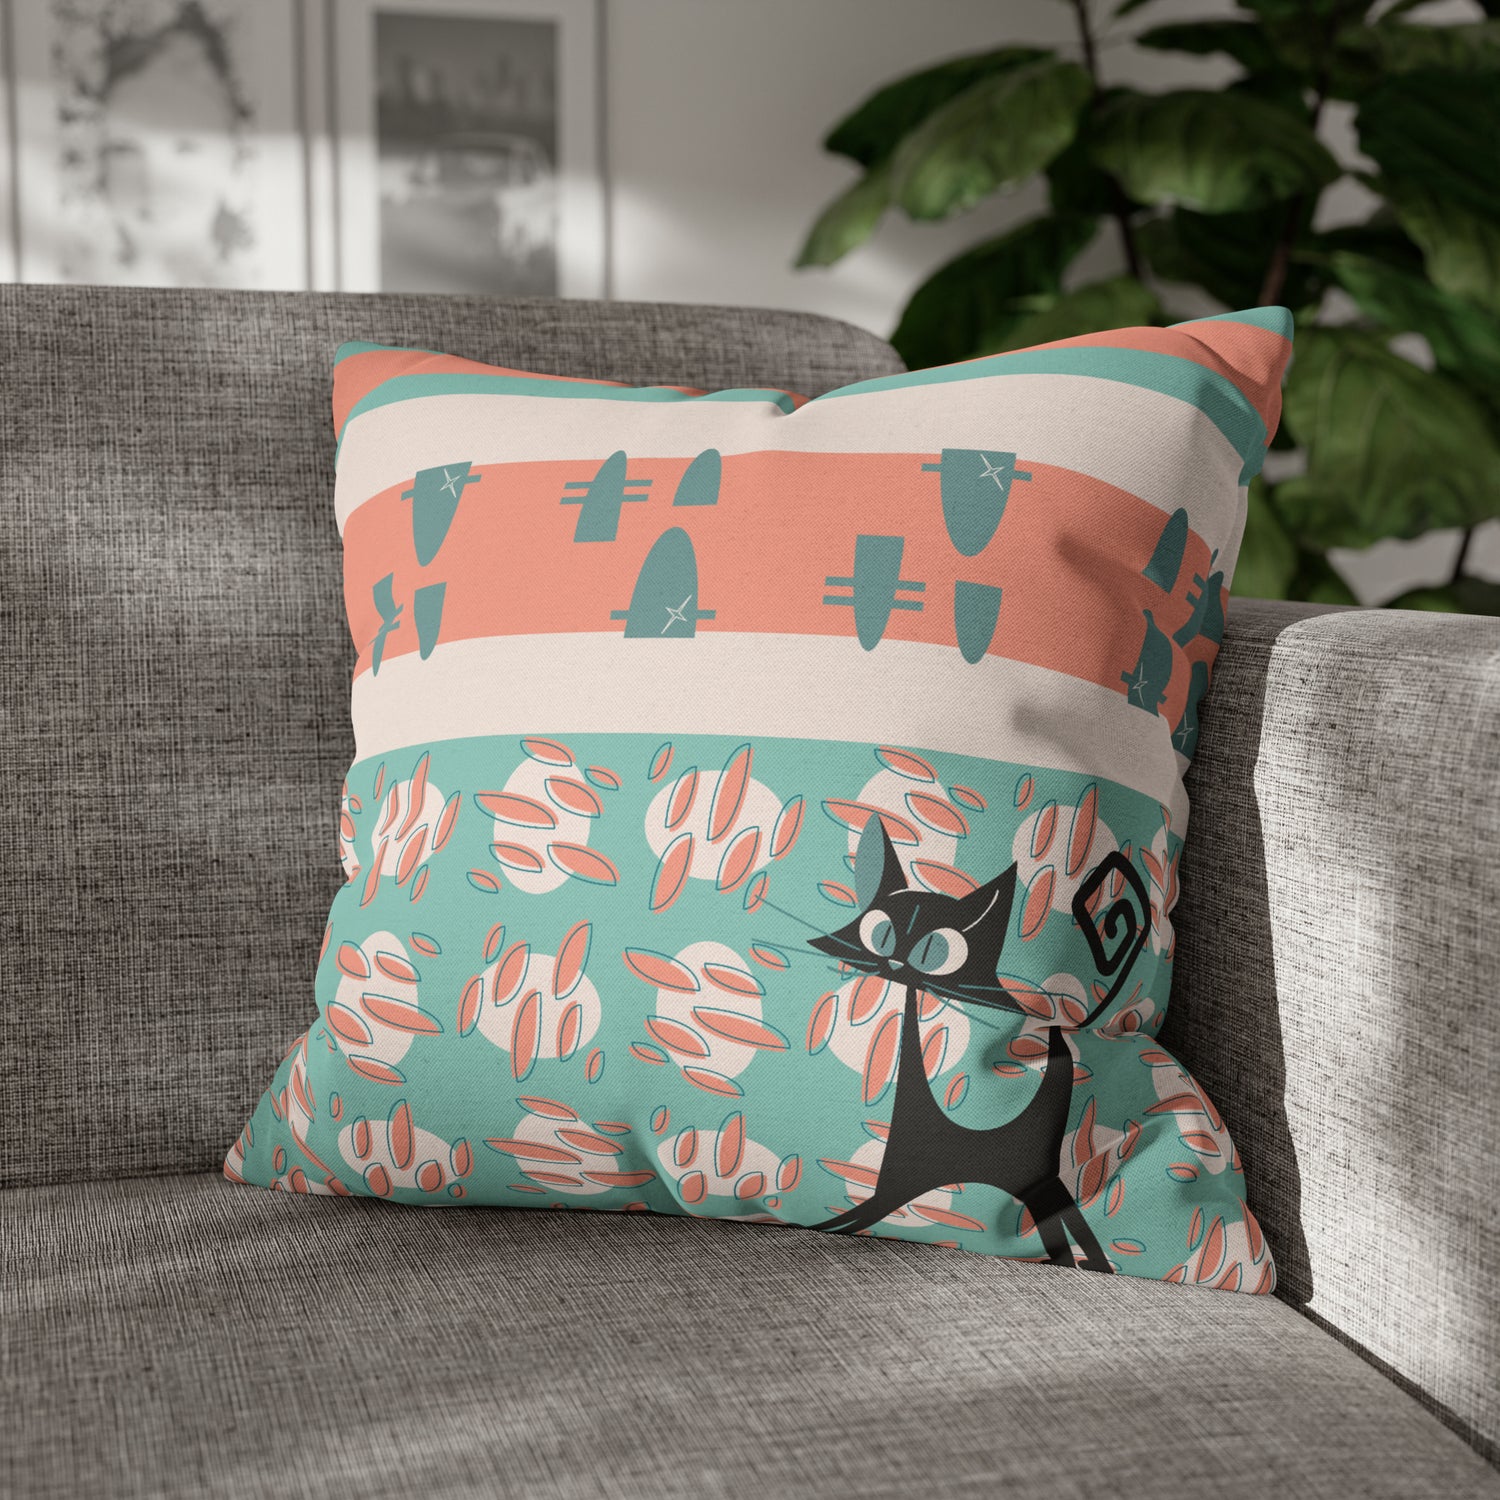 50s Nostalgic Atomic Cat Mid Century Modern Aqua, Coral Pink Peach, Kitschy Mid Century Modern Pillow Cover ONLY